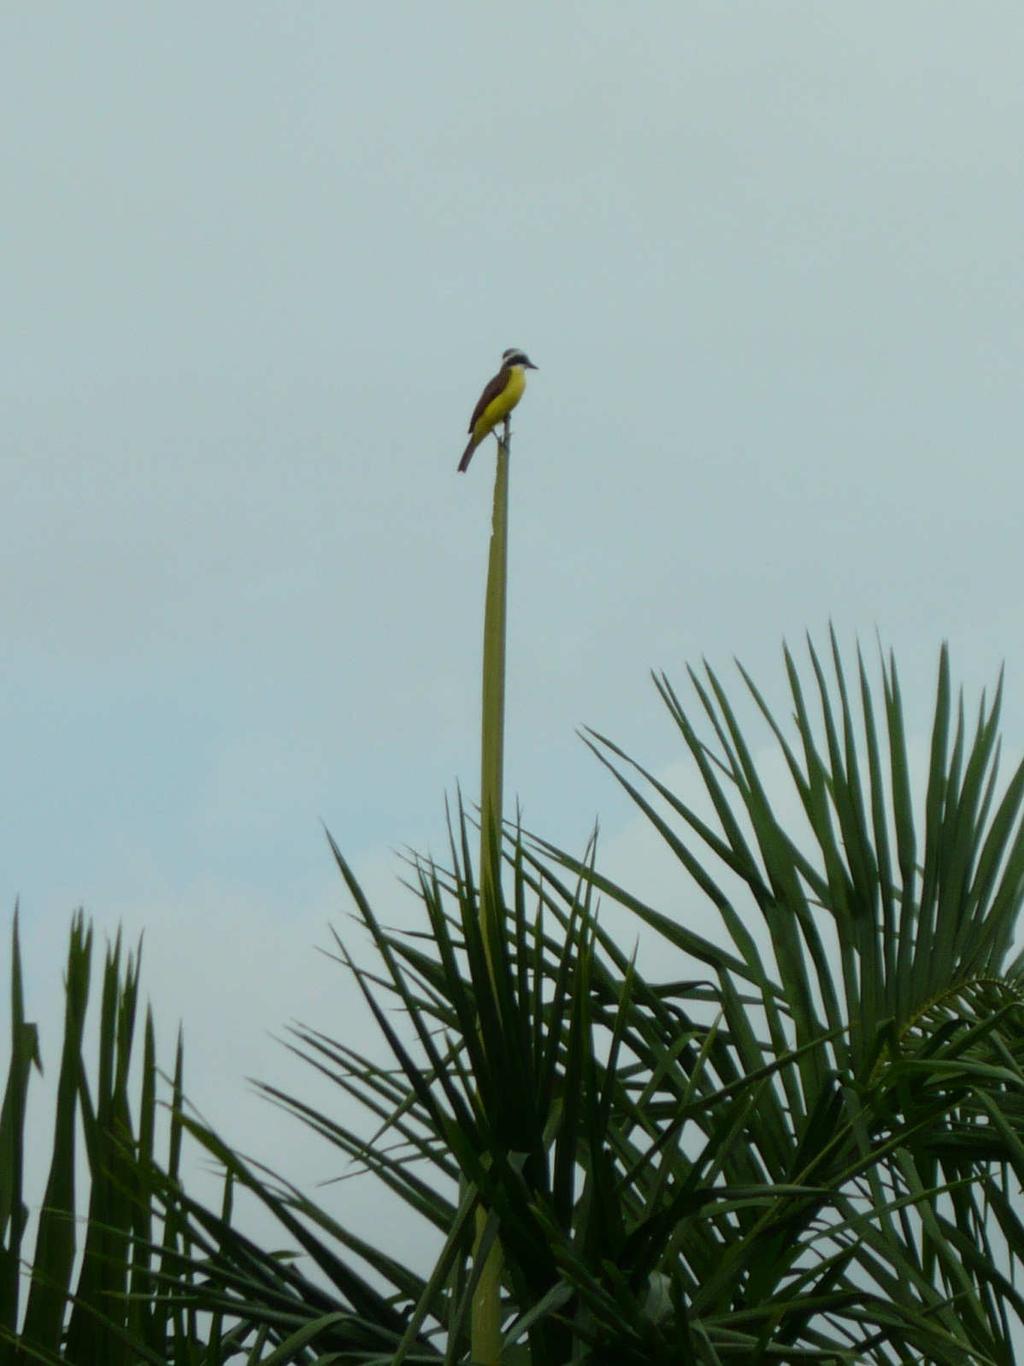 I can t tell you how many times I tried to get a photo of a Kiskadee bird until finally this one sat quietly on the palm tree outside my window It was a wonderful little trip and I would thoroughly